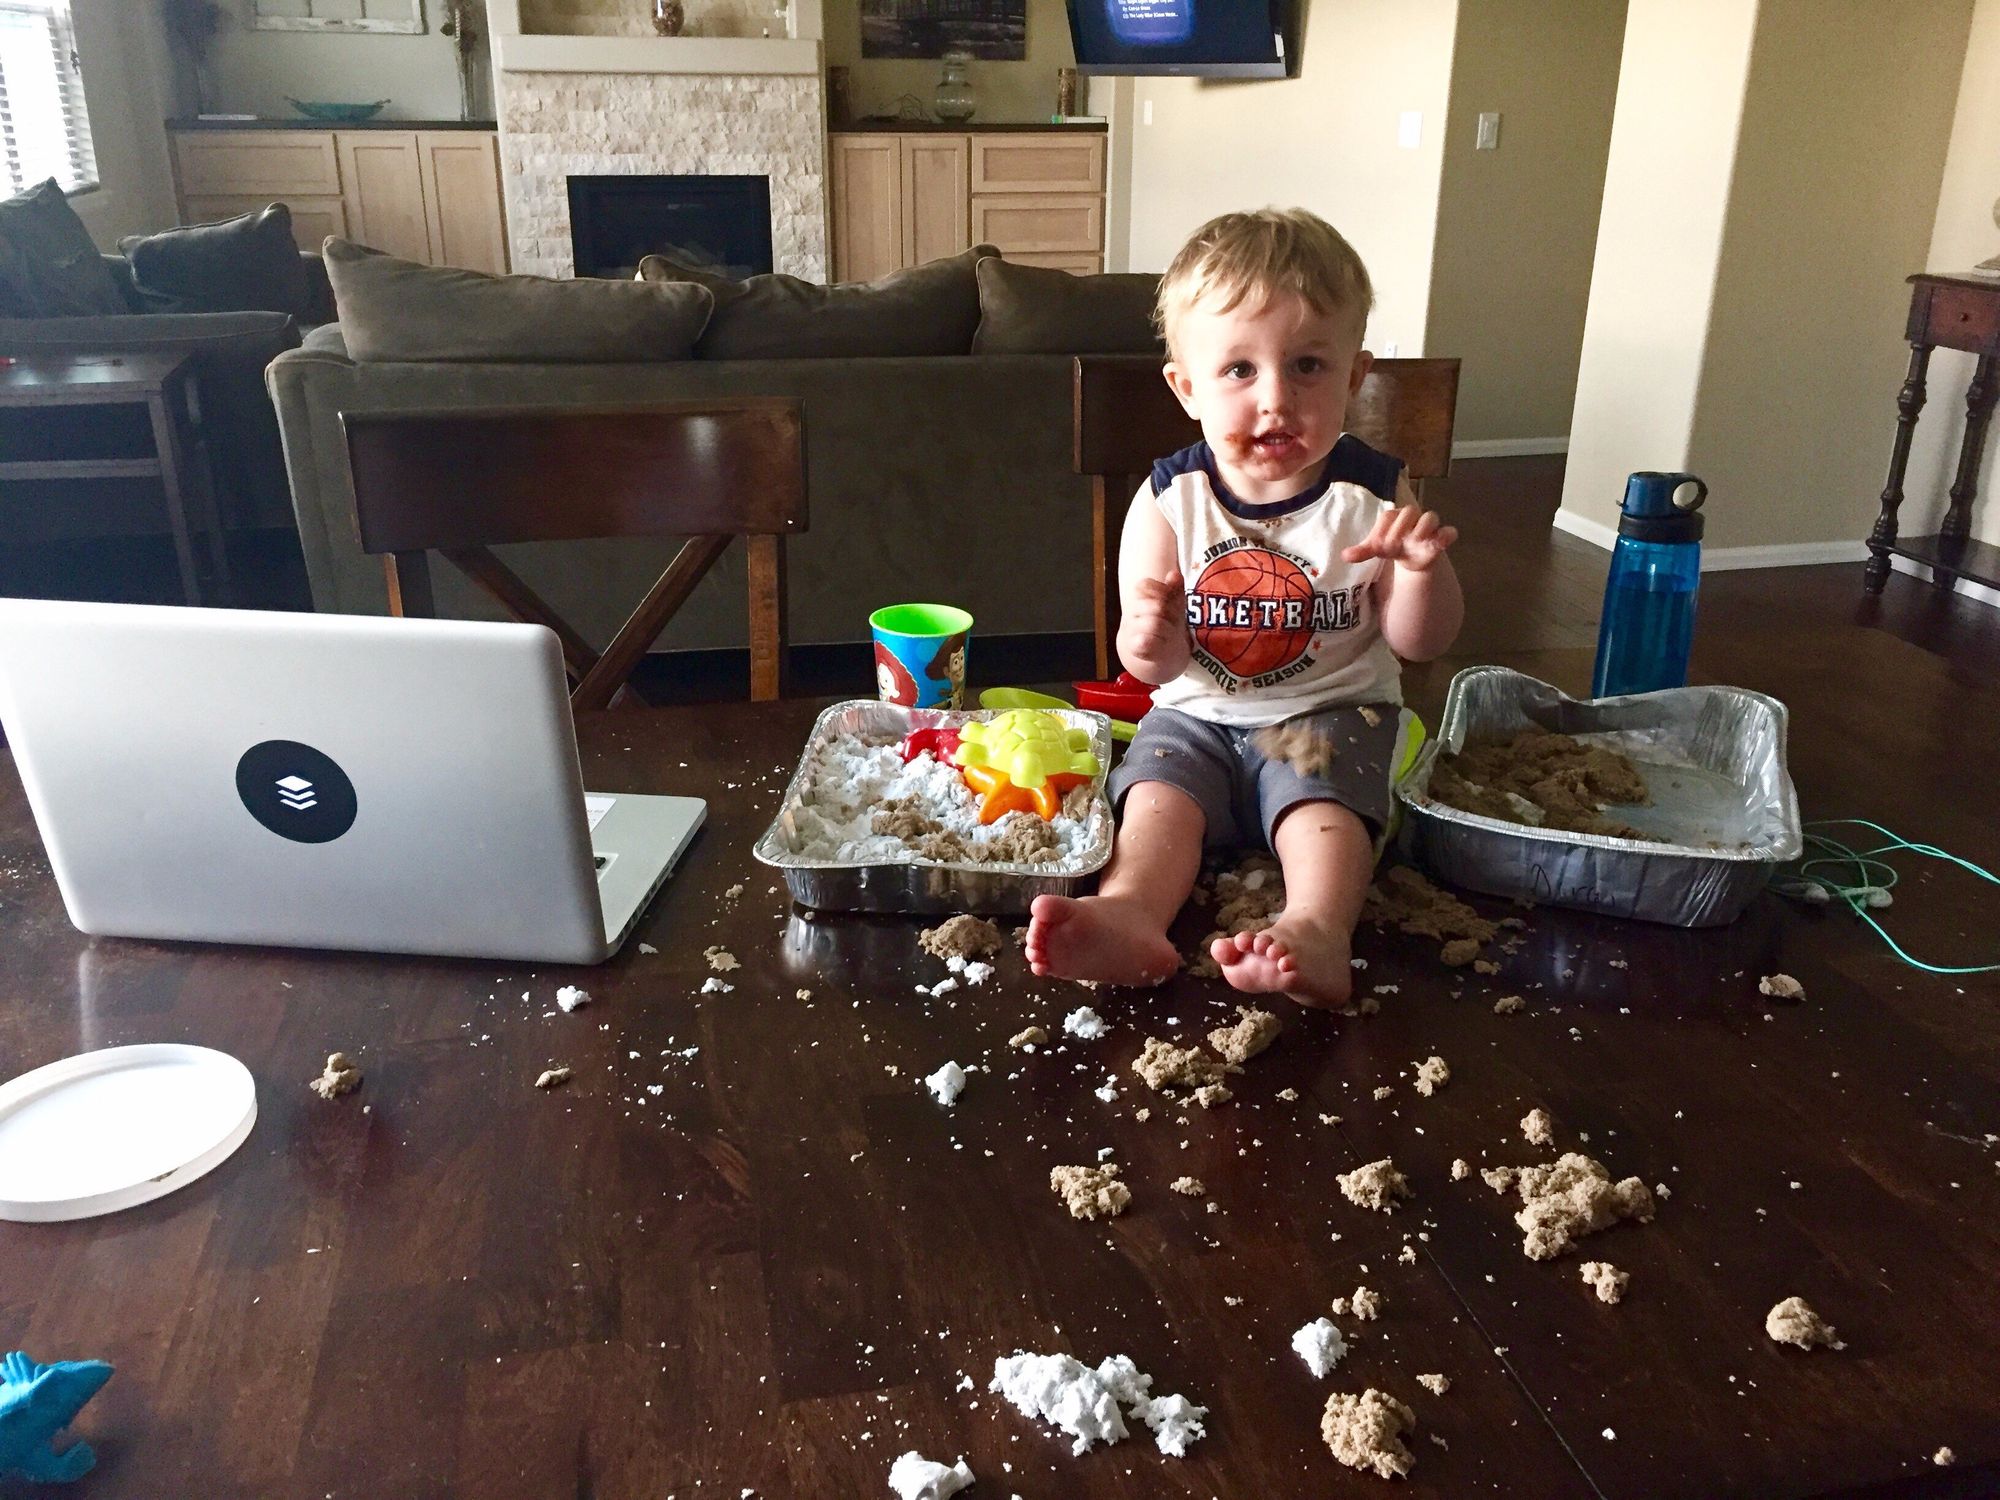 Working From Home with Kids: 21 Tips From Our Remote Team